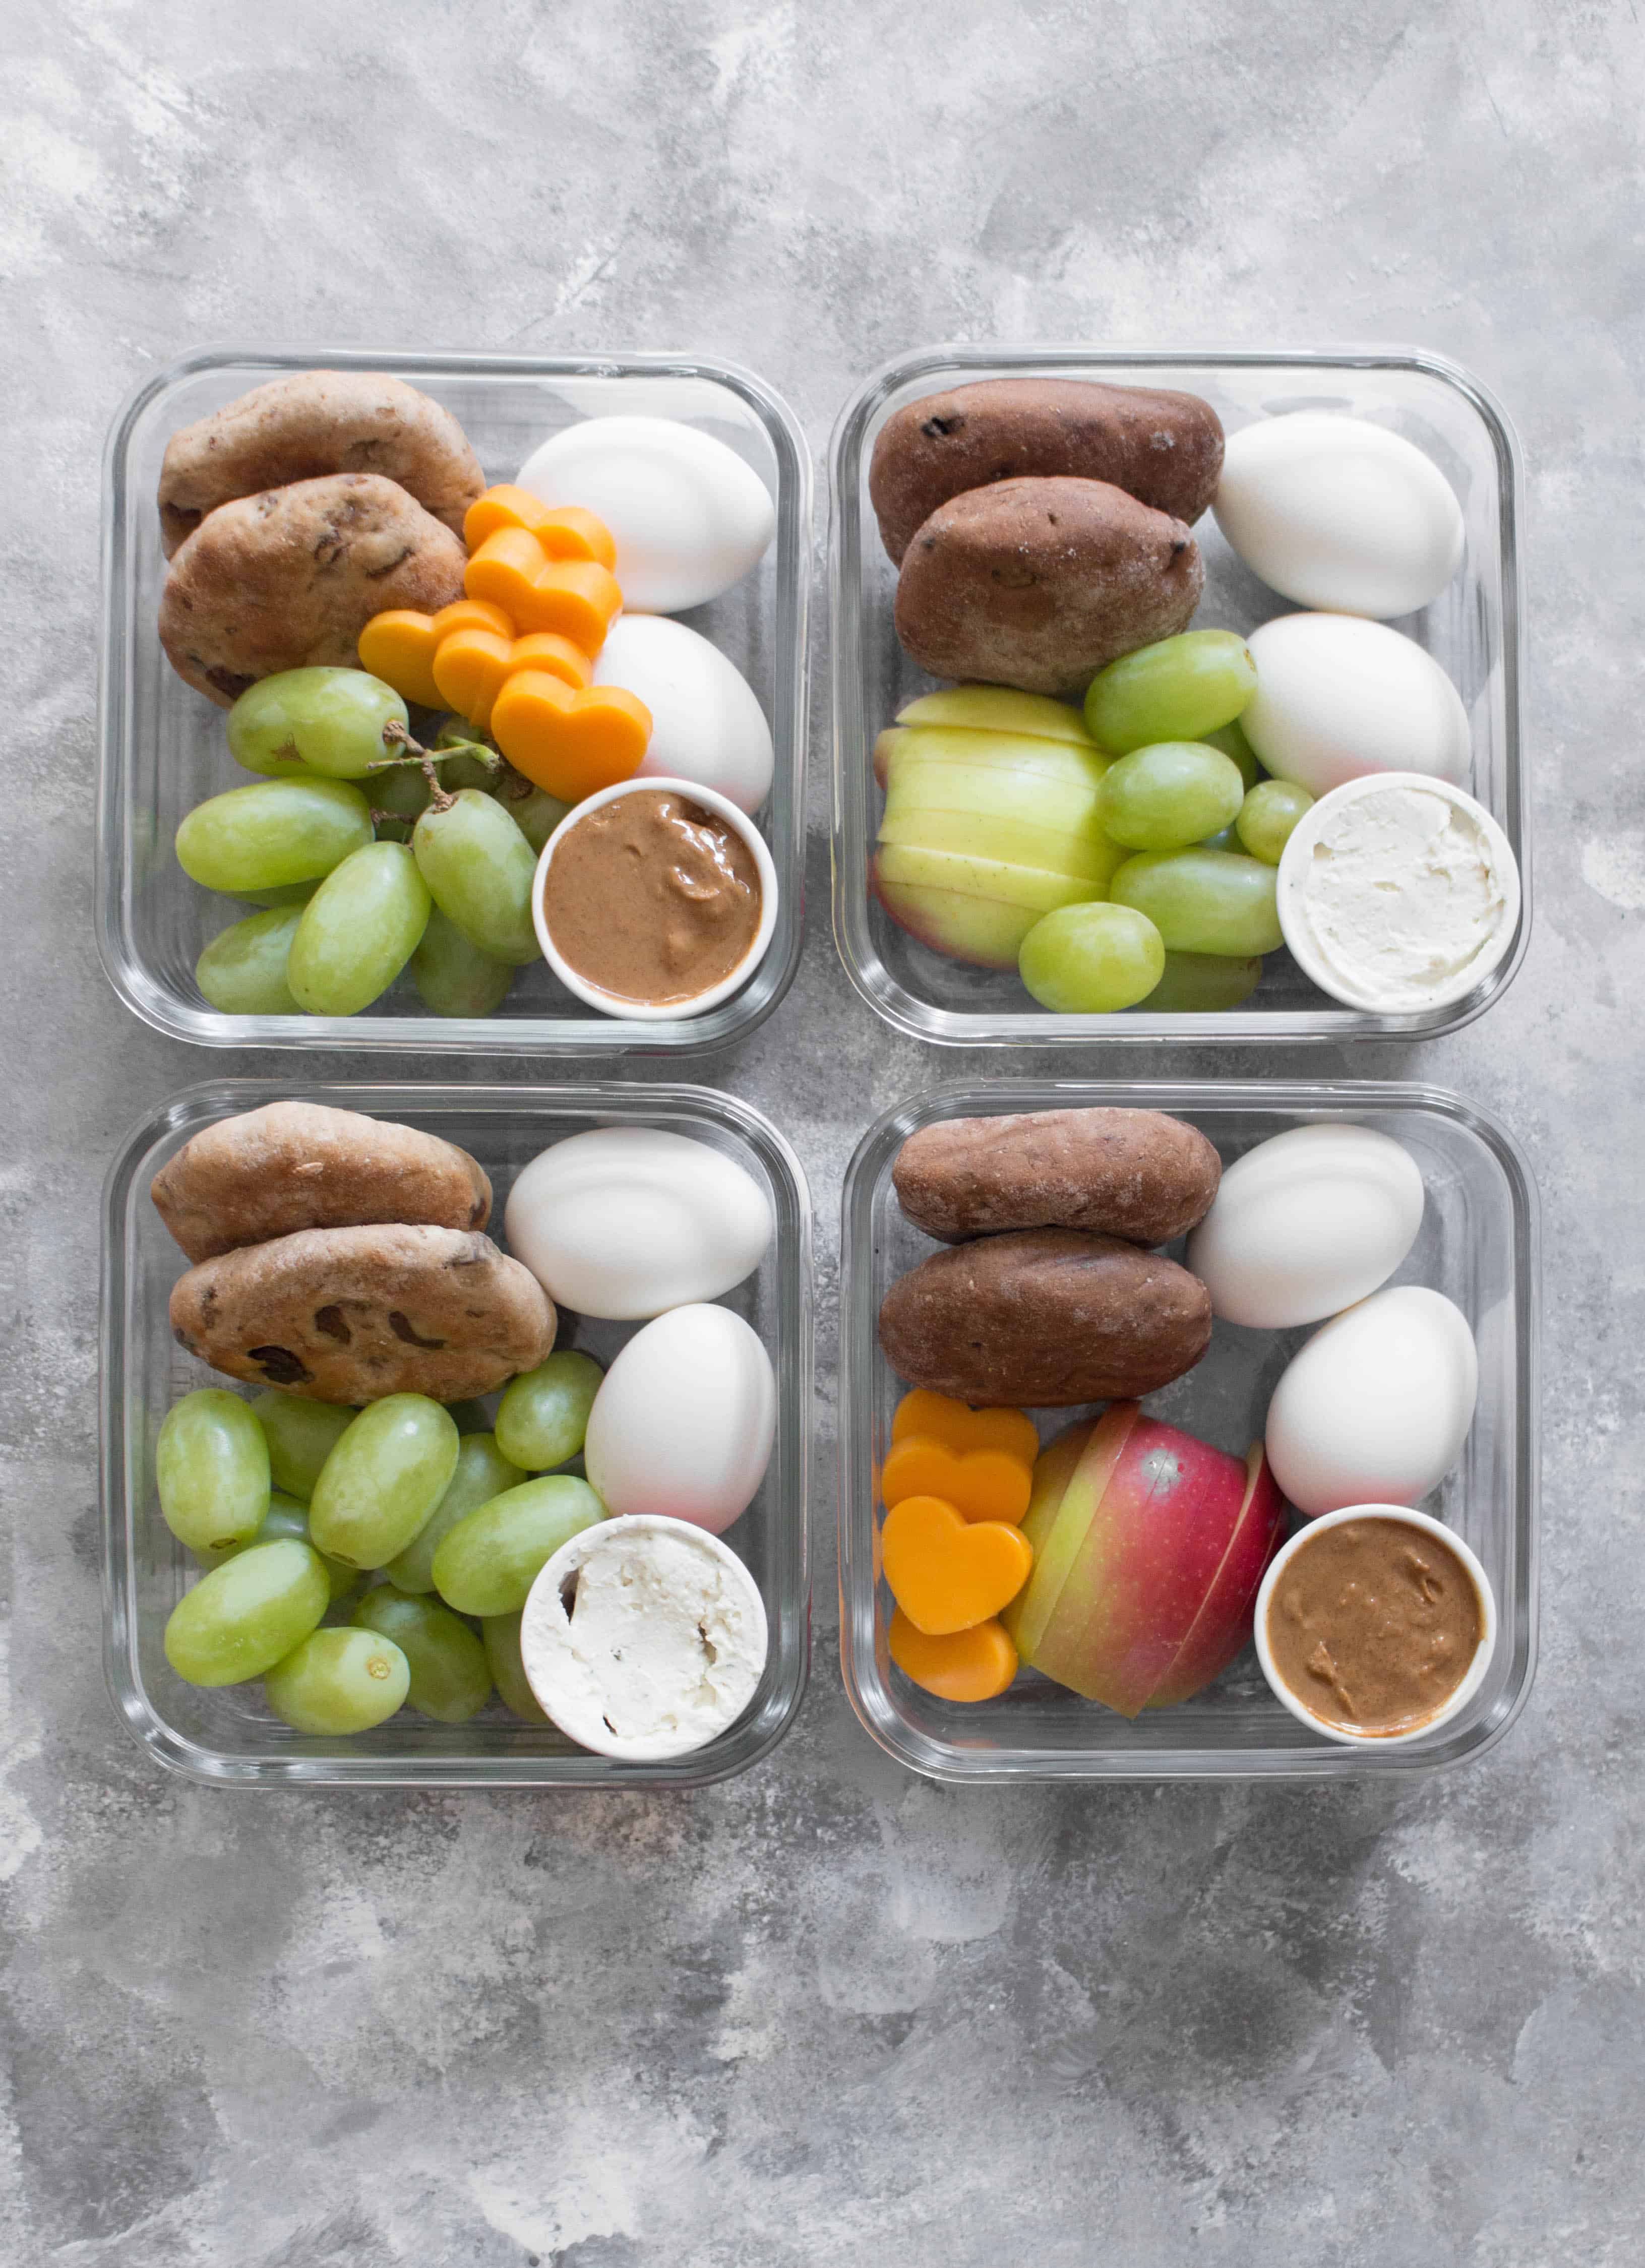 Tired of spending all your money on the Starbucks Eggs and Cheese Protein Box? Well, you can make your own! These Healthy Make Ahead Snack Boxes are inspired by Starbucks and are so easy to make at home!